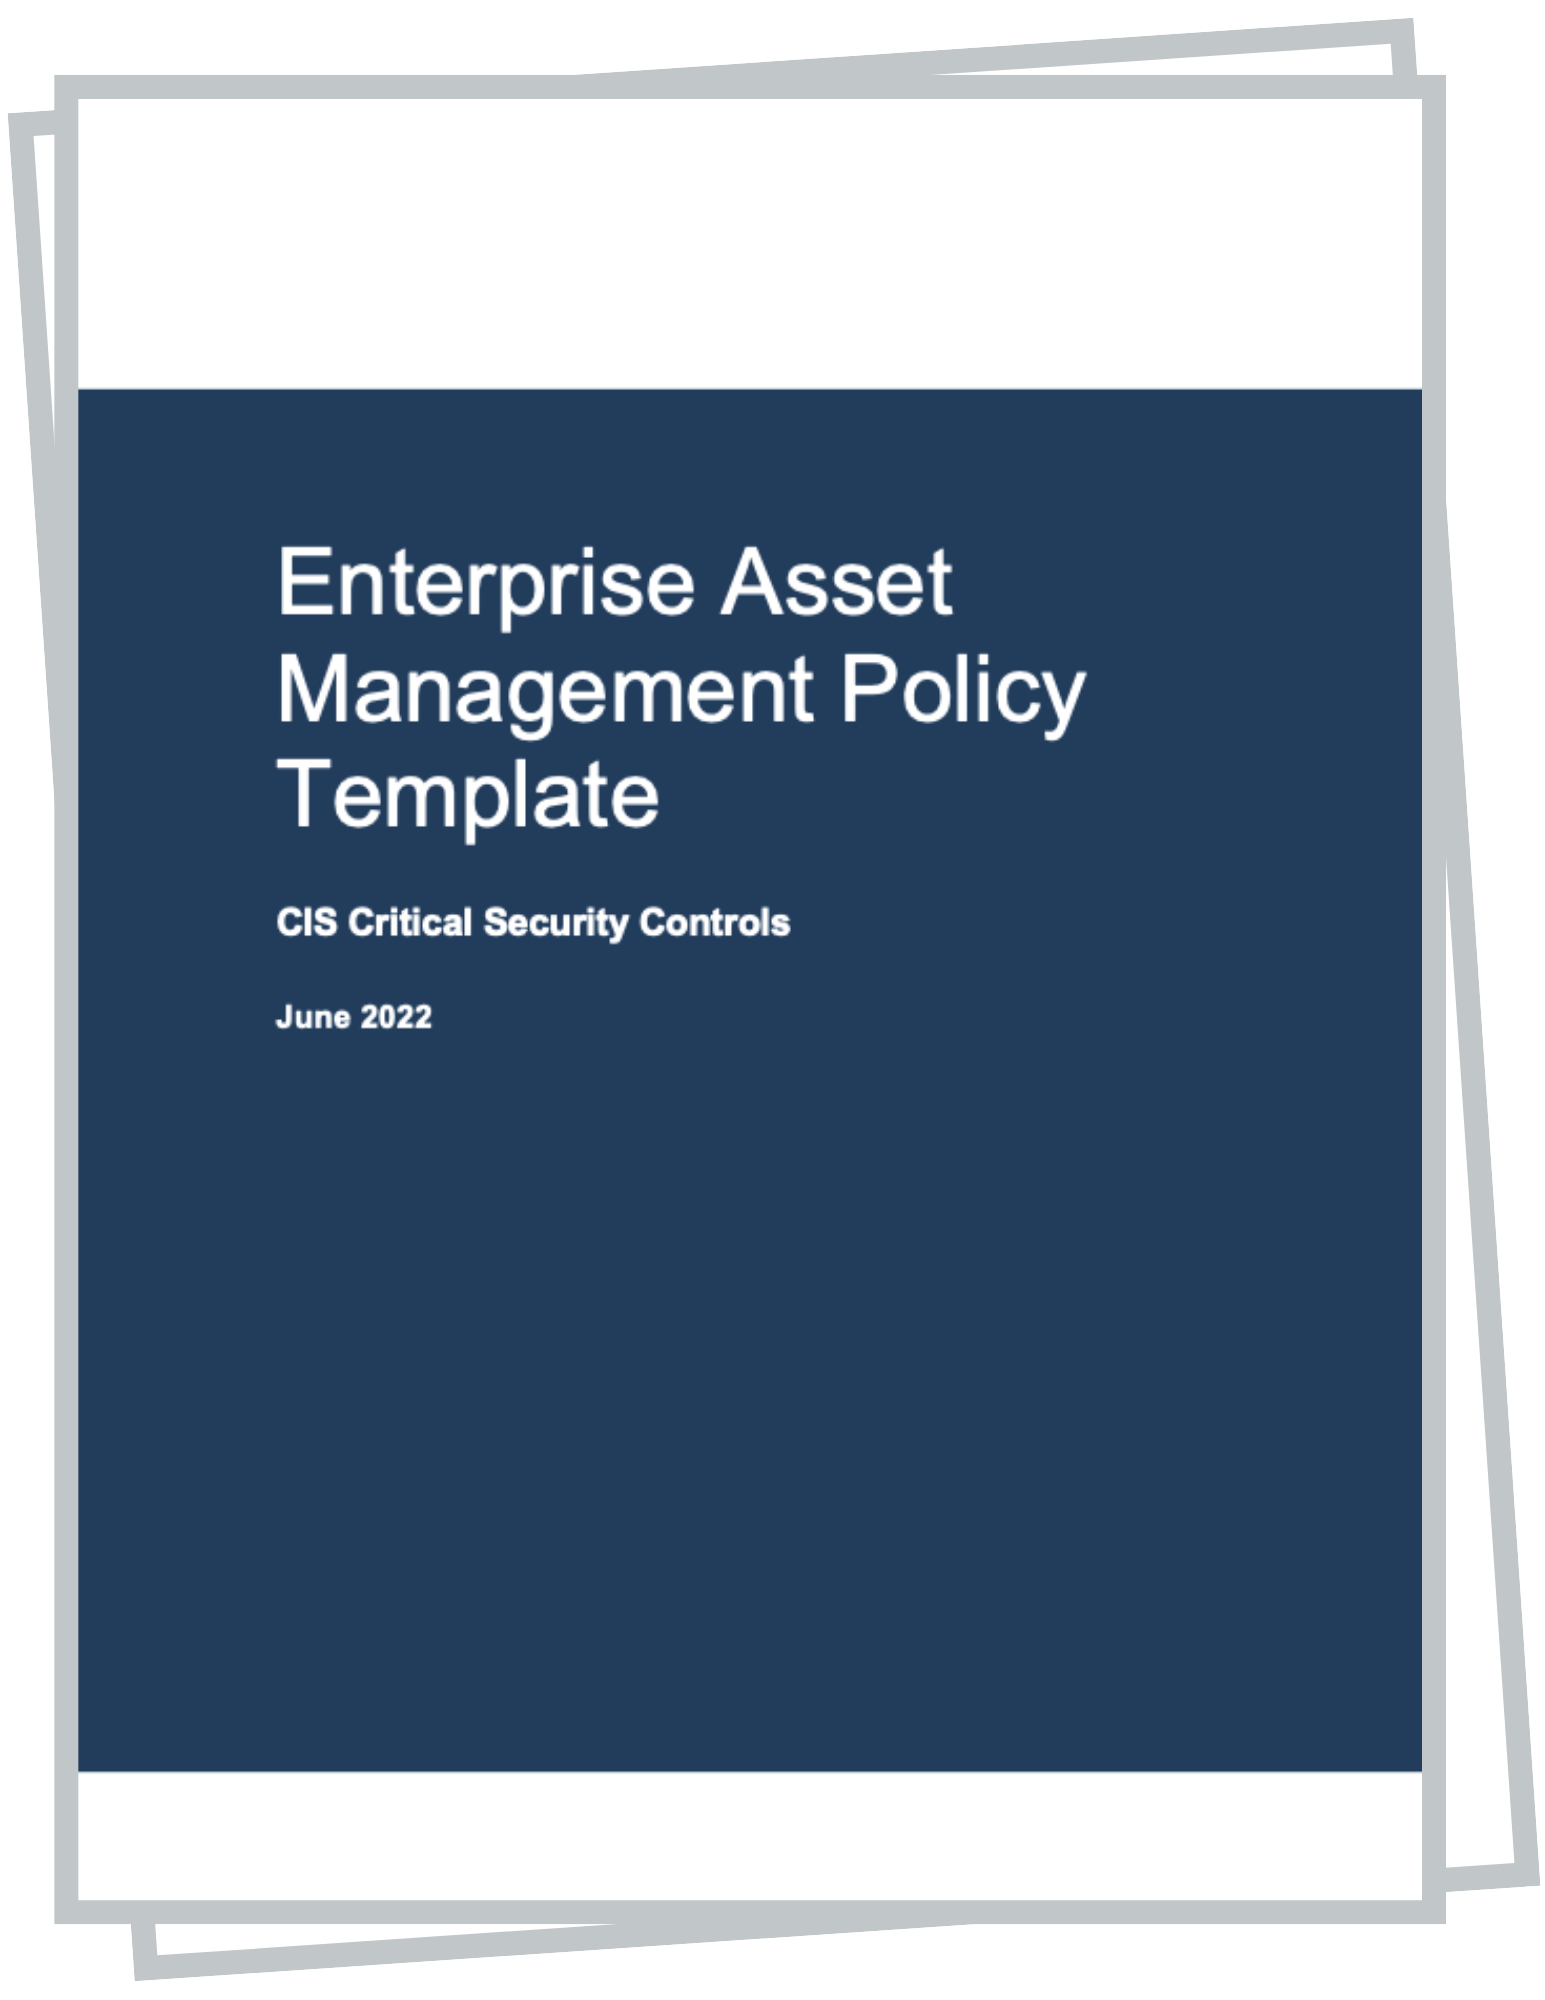 Enterprise Asset Management Policy Template cover